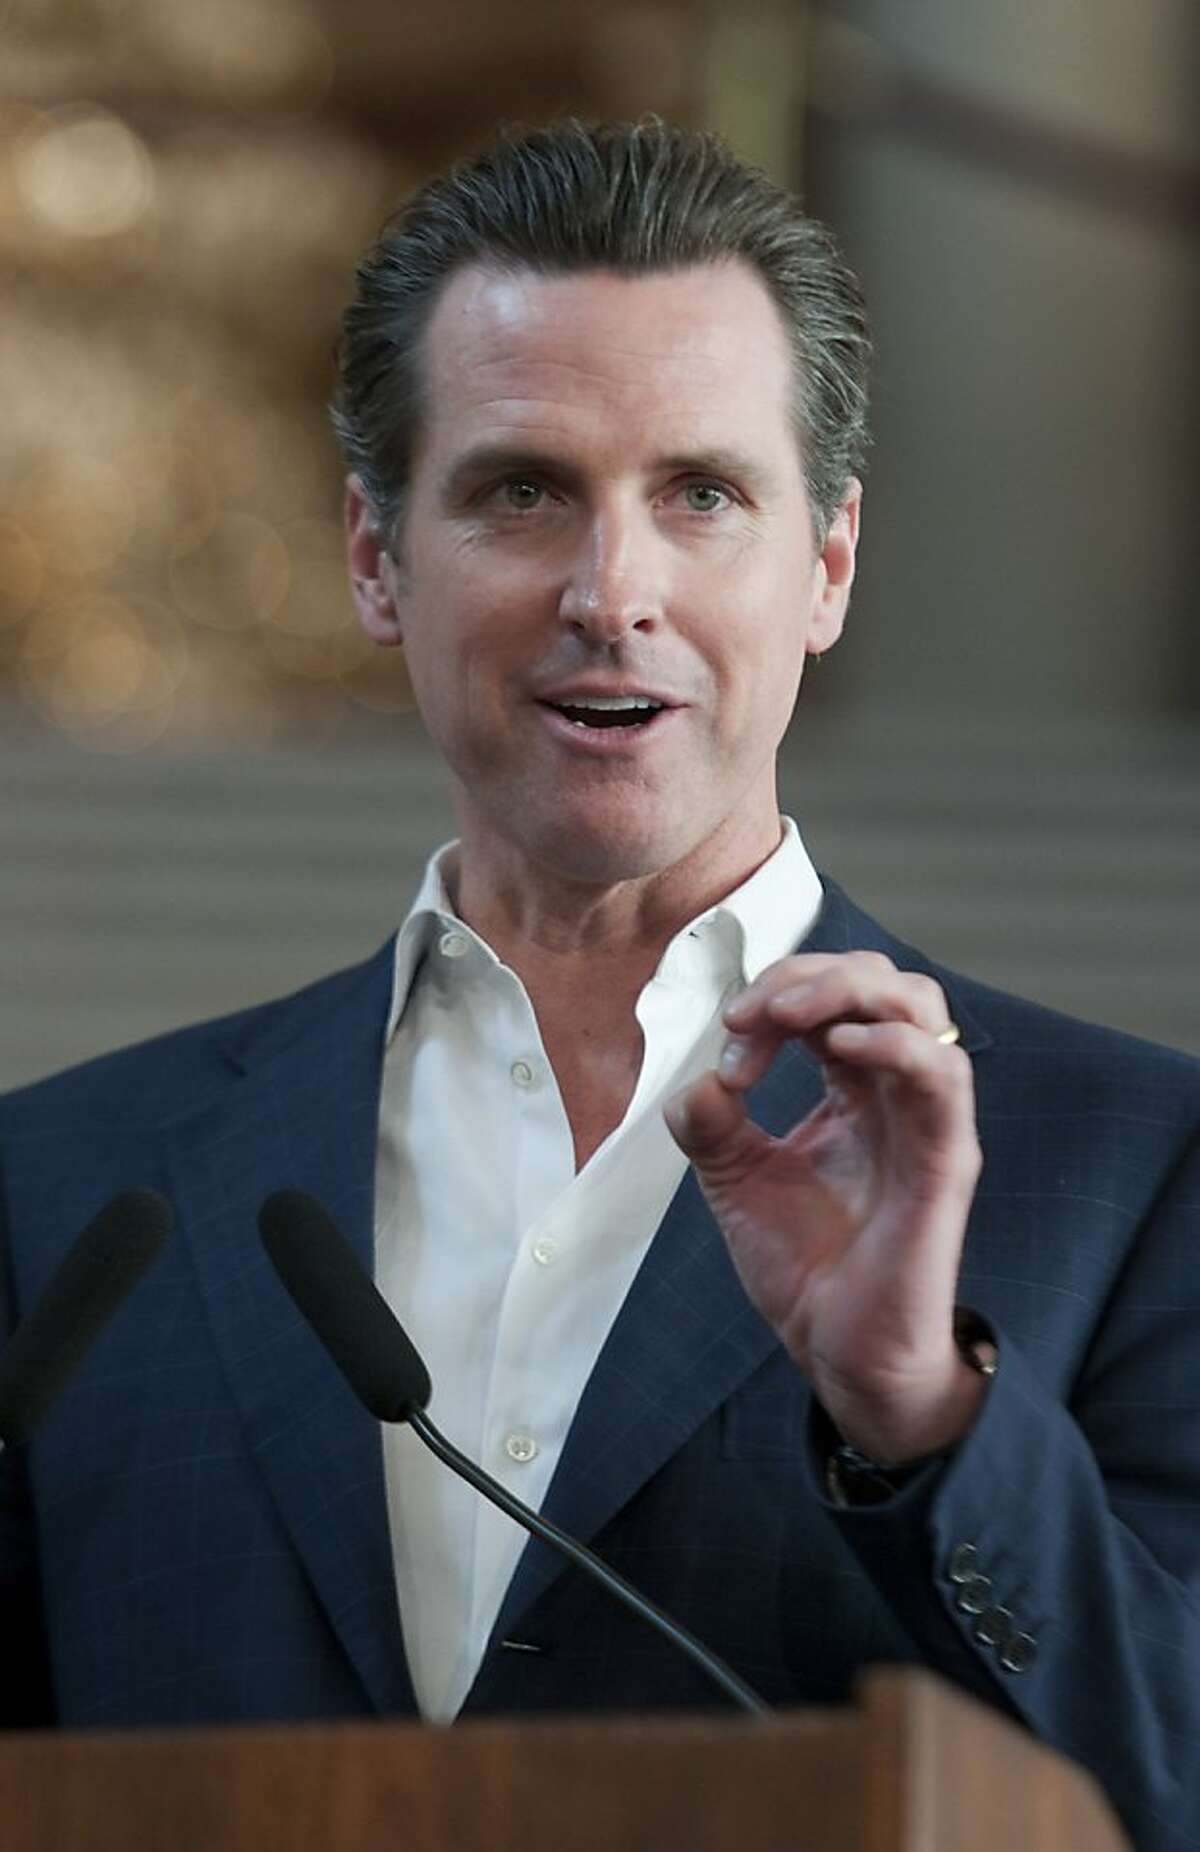 San Francisco Mayor Gavin Newsom announces the start of the World Series champion Commissioner's Trophy Tour on Wednesday, Dec. 15, 2010, at San Francisco City Hall. The tour will begin on Jan. 4, 2011. (Adam Lau/Special to The Chronicle)